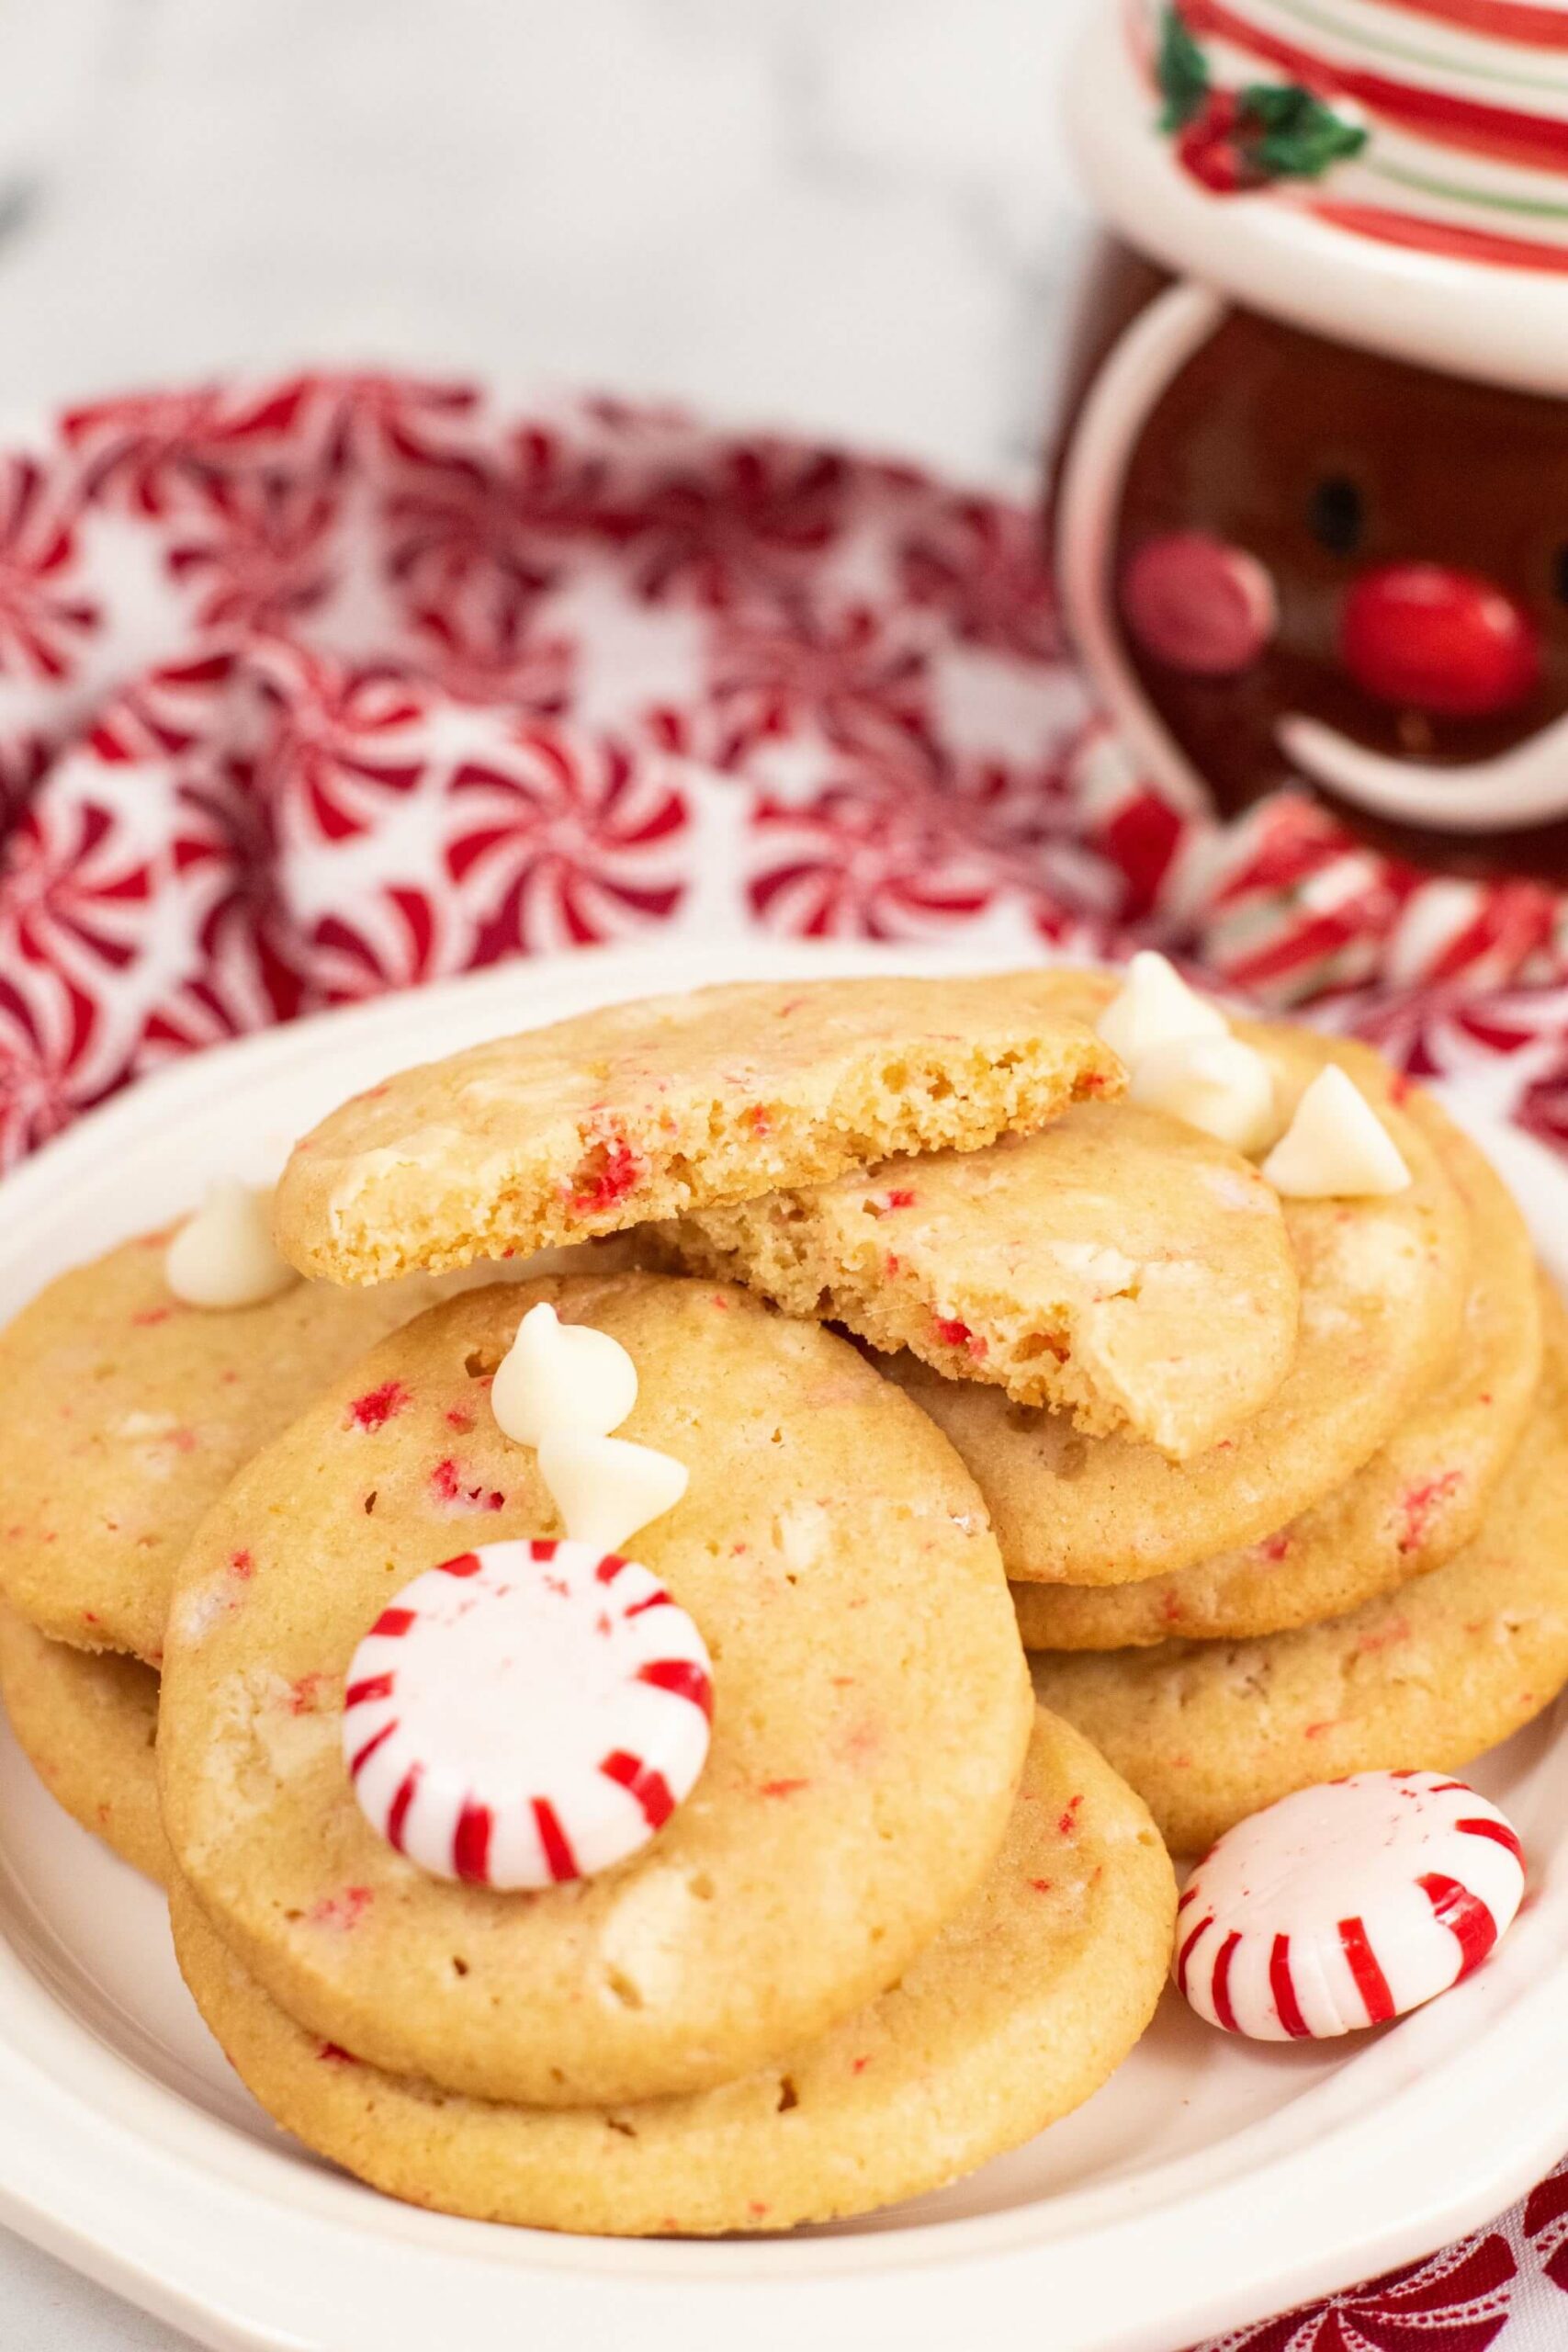 Peppermint Sugar Cookies are the personification of Christmas. They are fun, festive and flavorful. Packed with peppermint and creamy white chocolate.